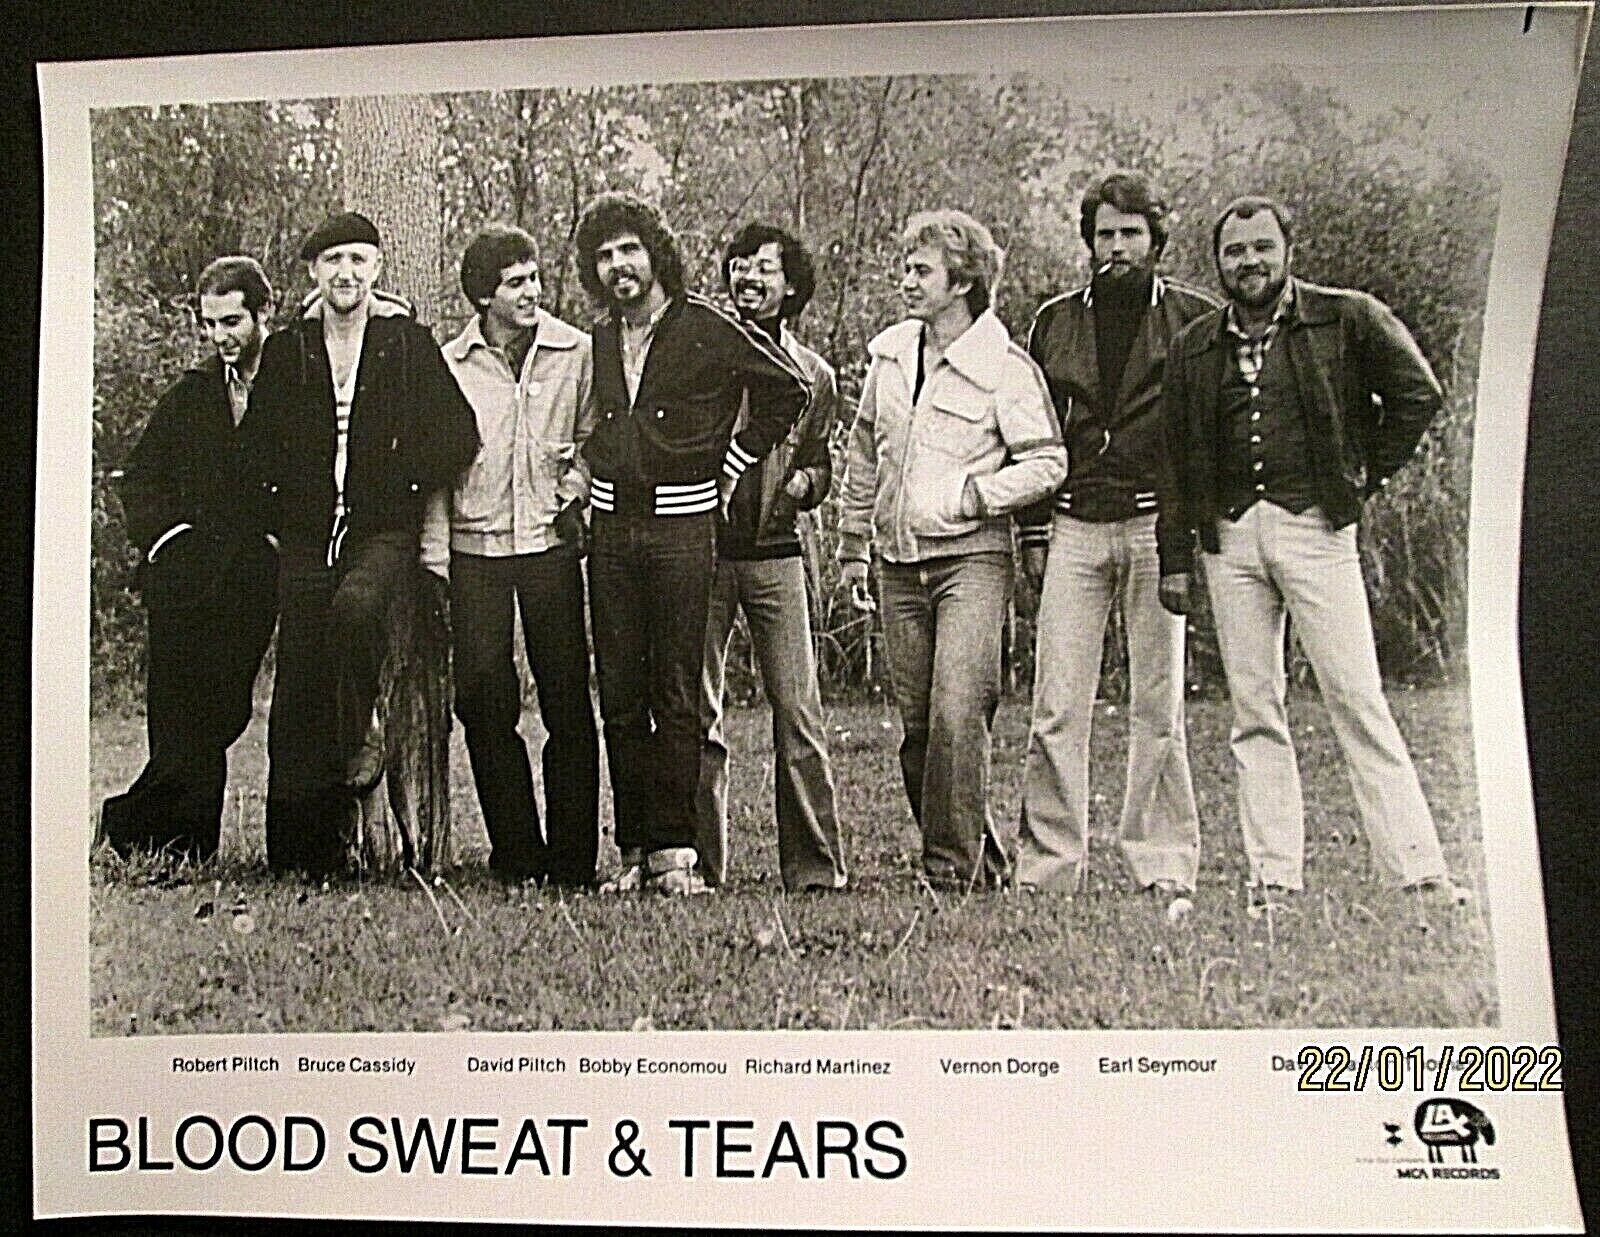 BLOOD SWEAT & TEARS ( ORIGINAL VINTAGE RECORD PROMO Photo Poster painting) CLASSIC Photo Poster painting